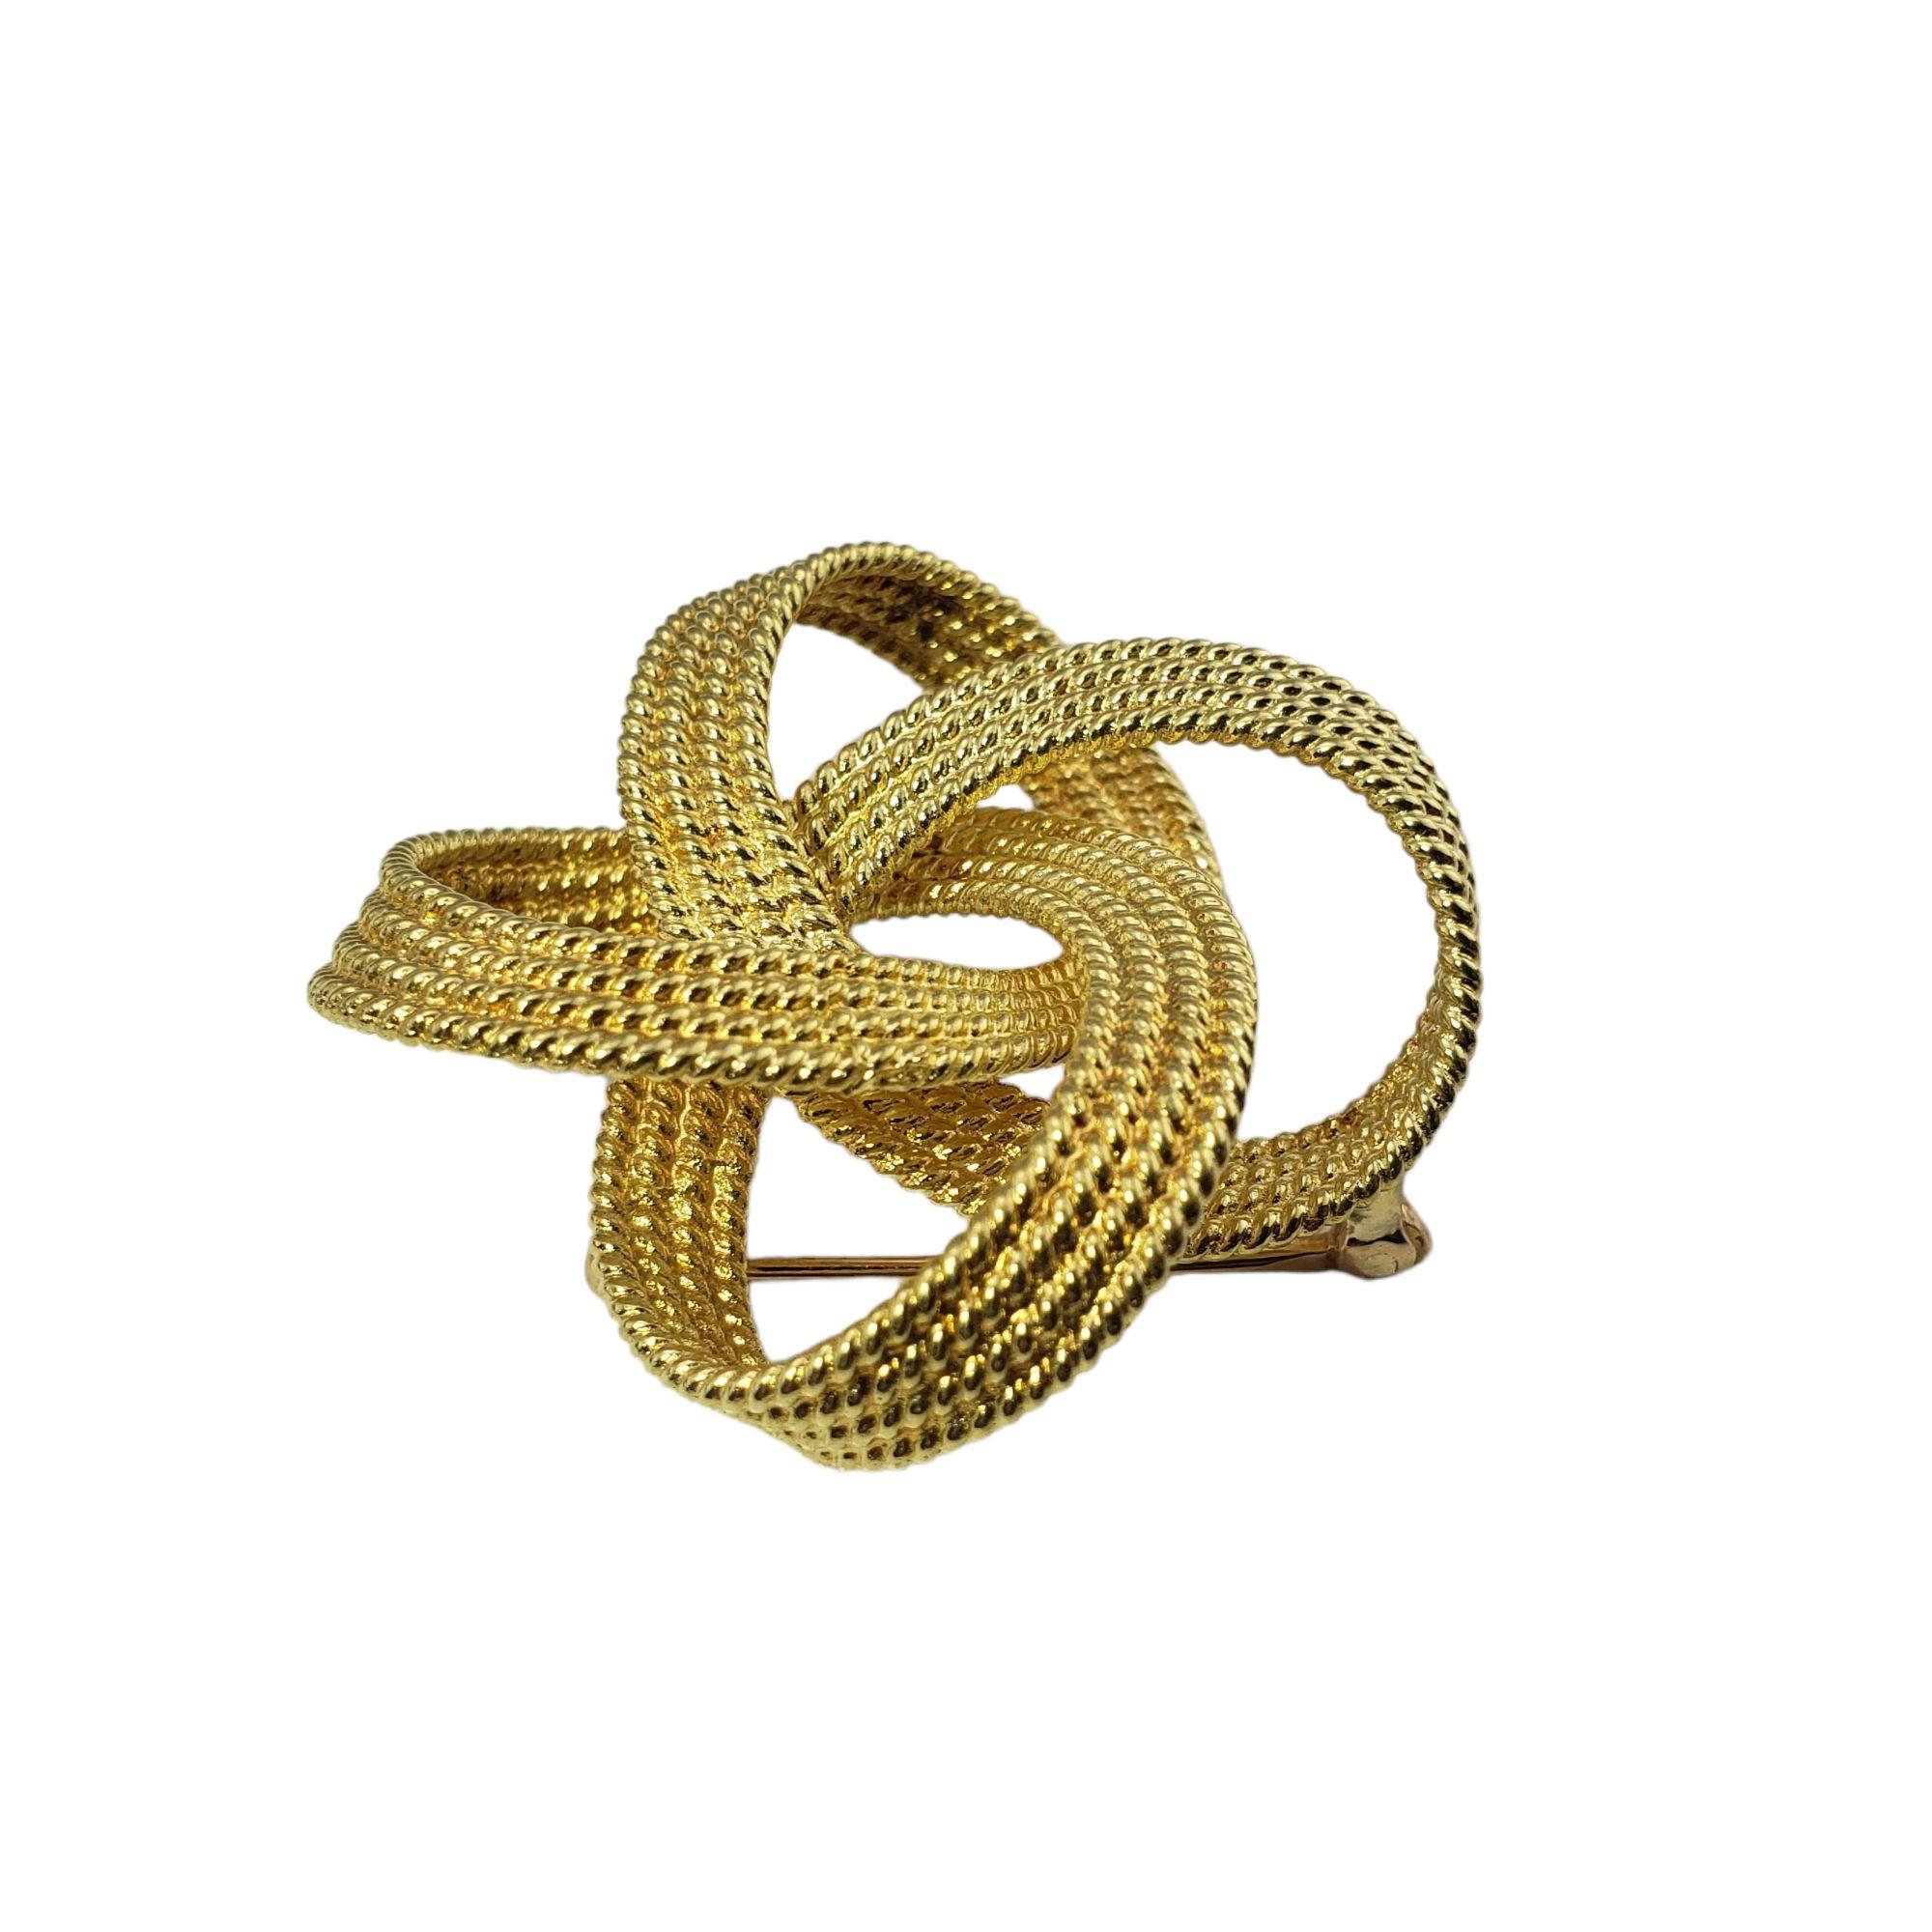 Vintage Tiffany & Co. 18 Karat Yellow Gold Knot Brooch/Pin-

This stunning brooch by Tiffany & Co. is meticulously crafted in beautifully detailed 18K yellow gold.

Size: 40 mm

Weight: 13.9 dwt. / 21.67 gr.

Hallmark: 18K Tiffany & Co

Very good